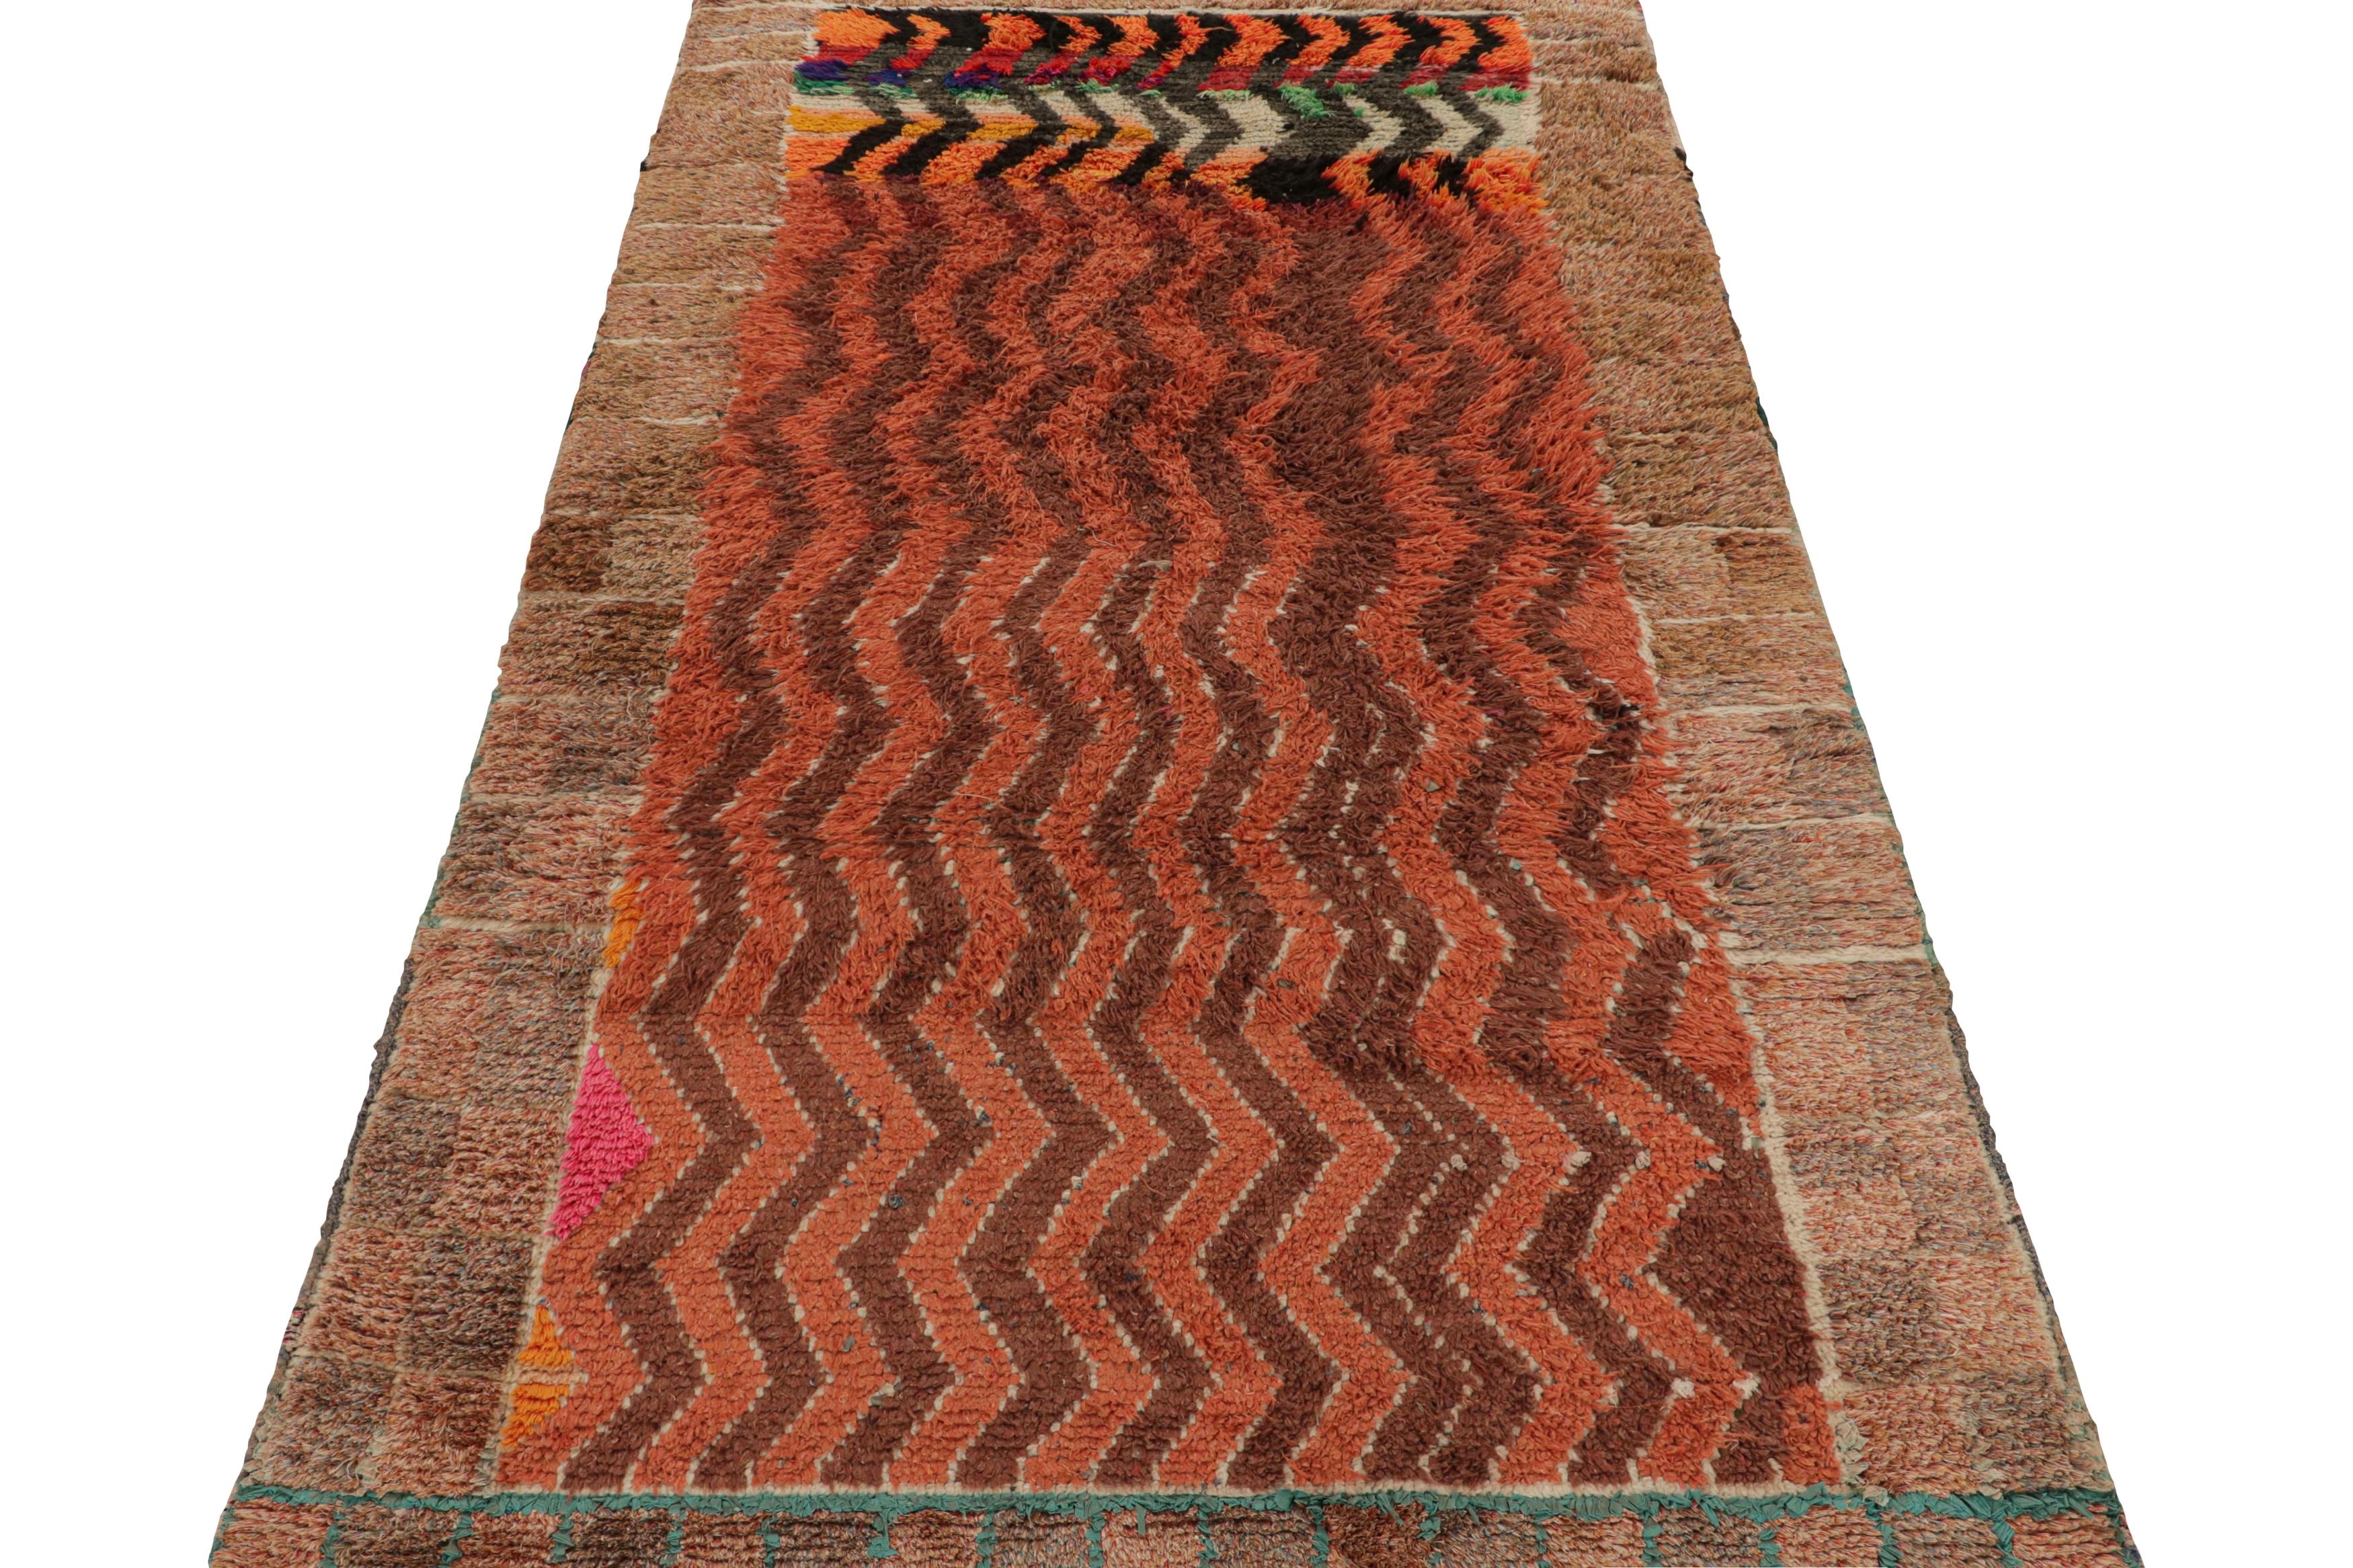 1950s Midcentury Vintage Moroccan Runner Orange Chevron Pattern by Rug & Kilim In Good Condition For Sale In Long Island City, NY